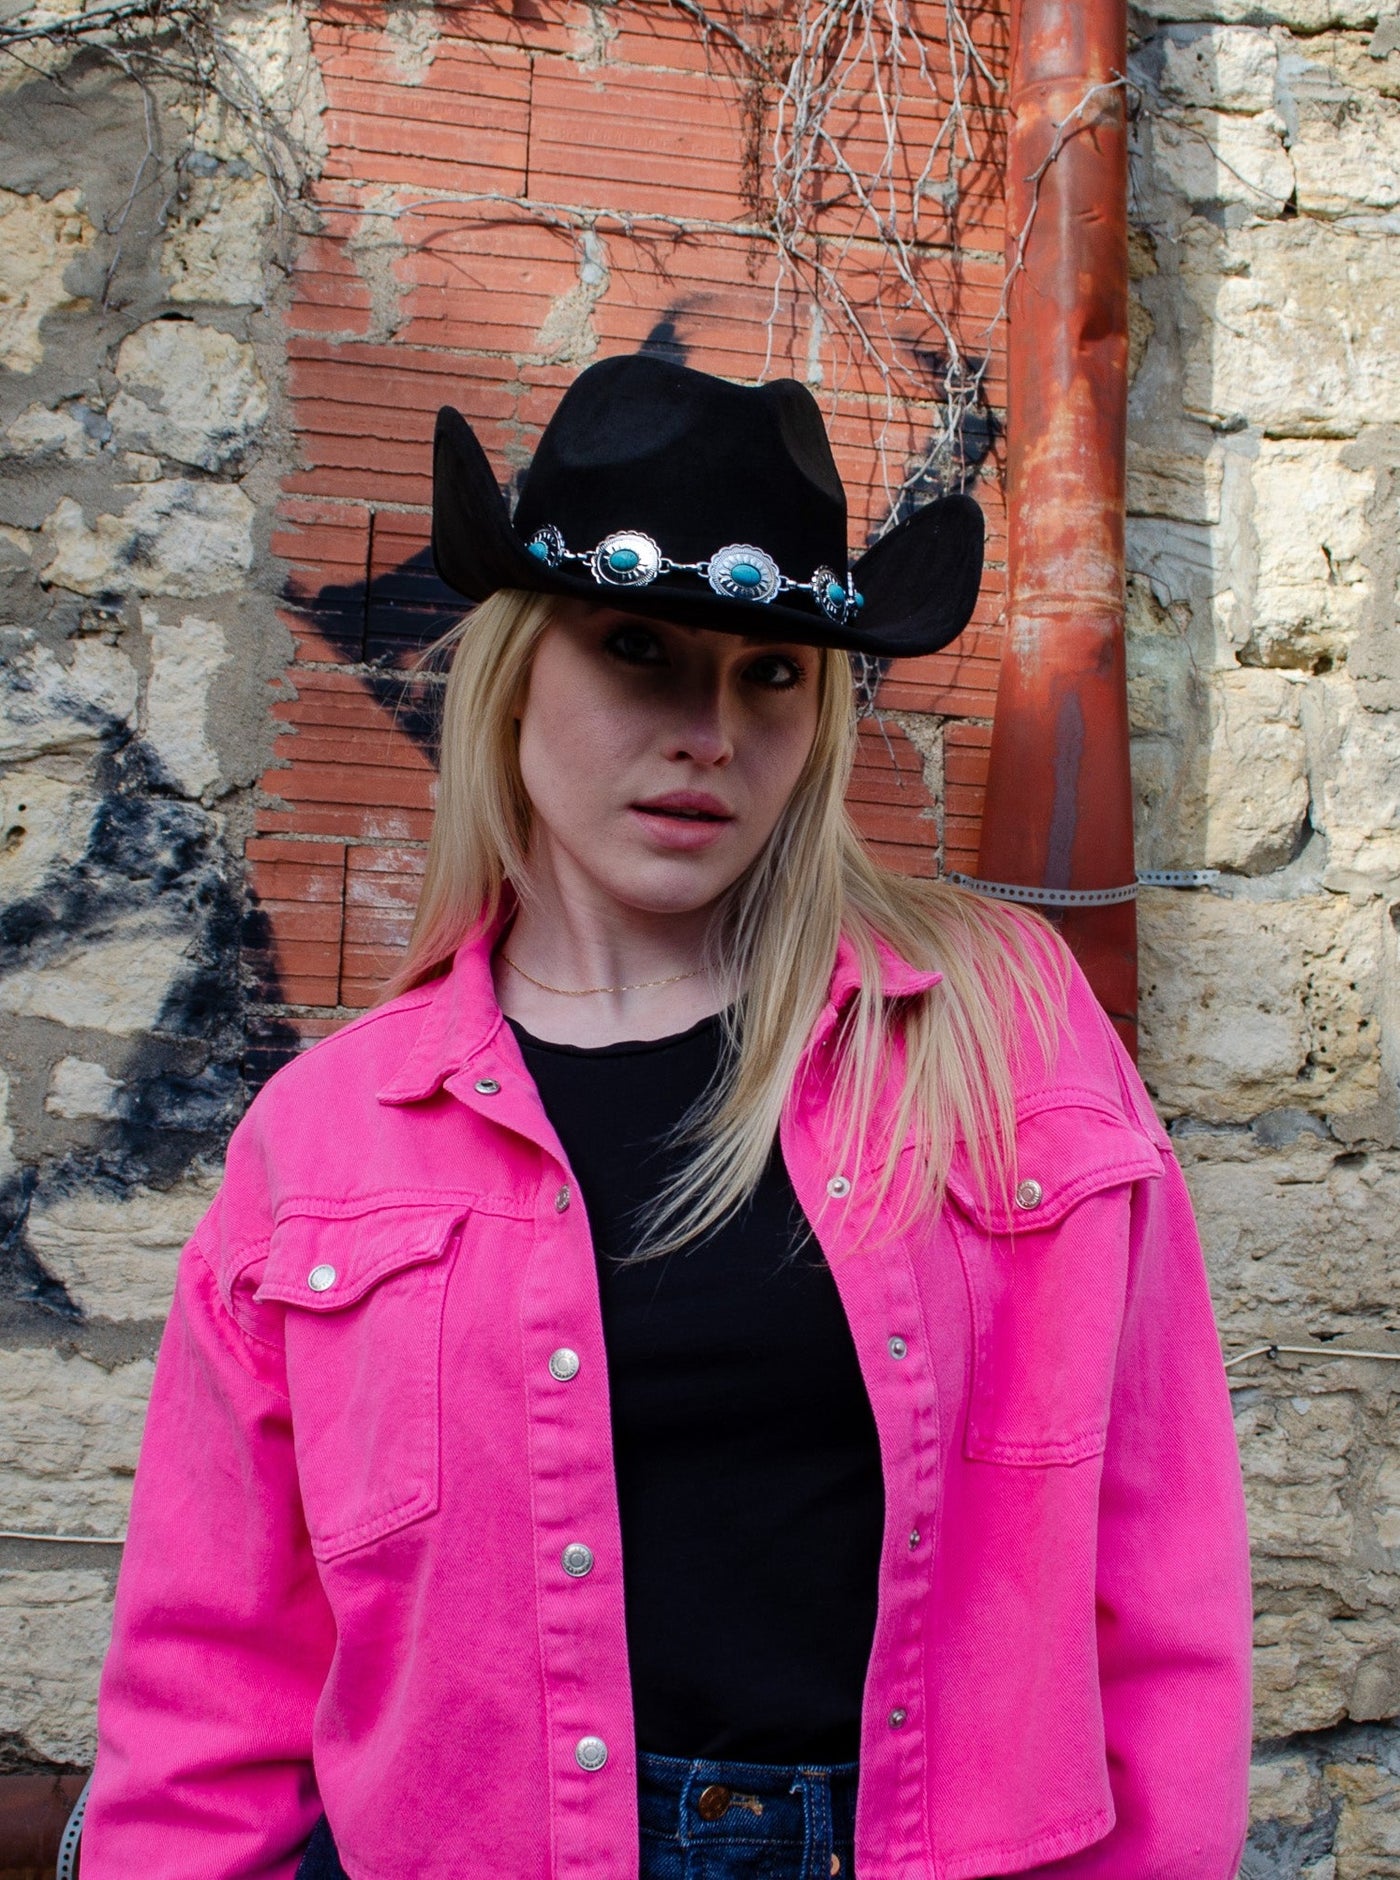 Model is wearing a black cowboy hat with turquoise and silver jewel detail. 